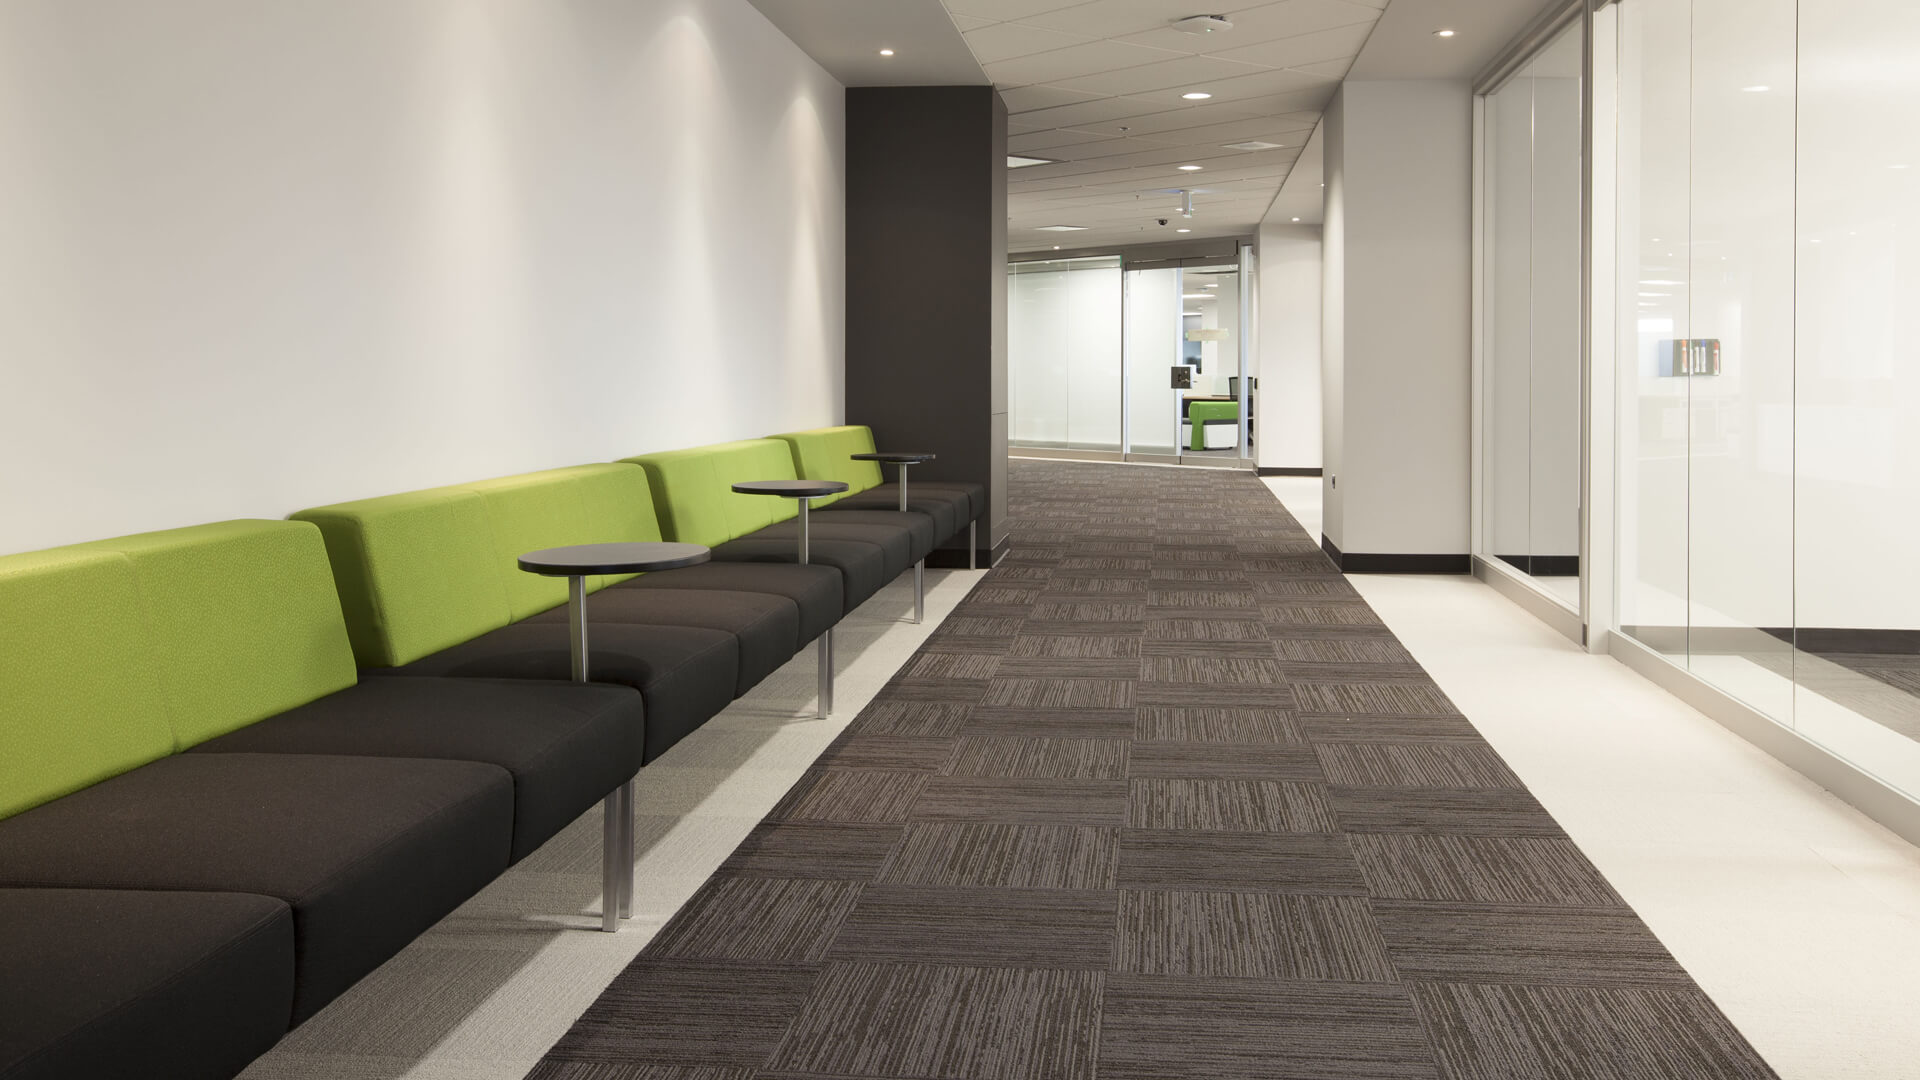 WE PLAN, DESIGN AND MANAGE COMMERCIAL OFFICE BUILDS